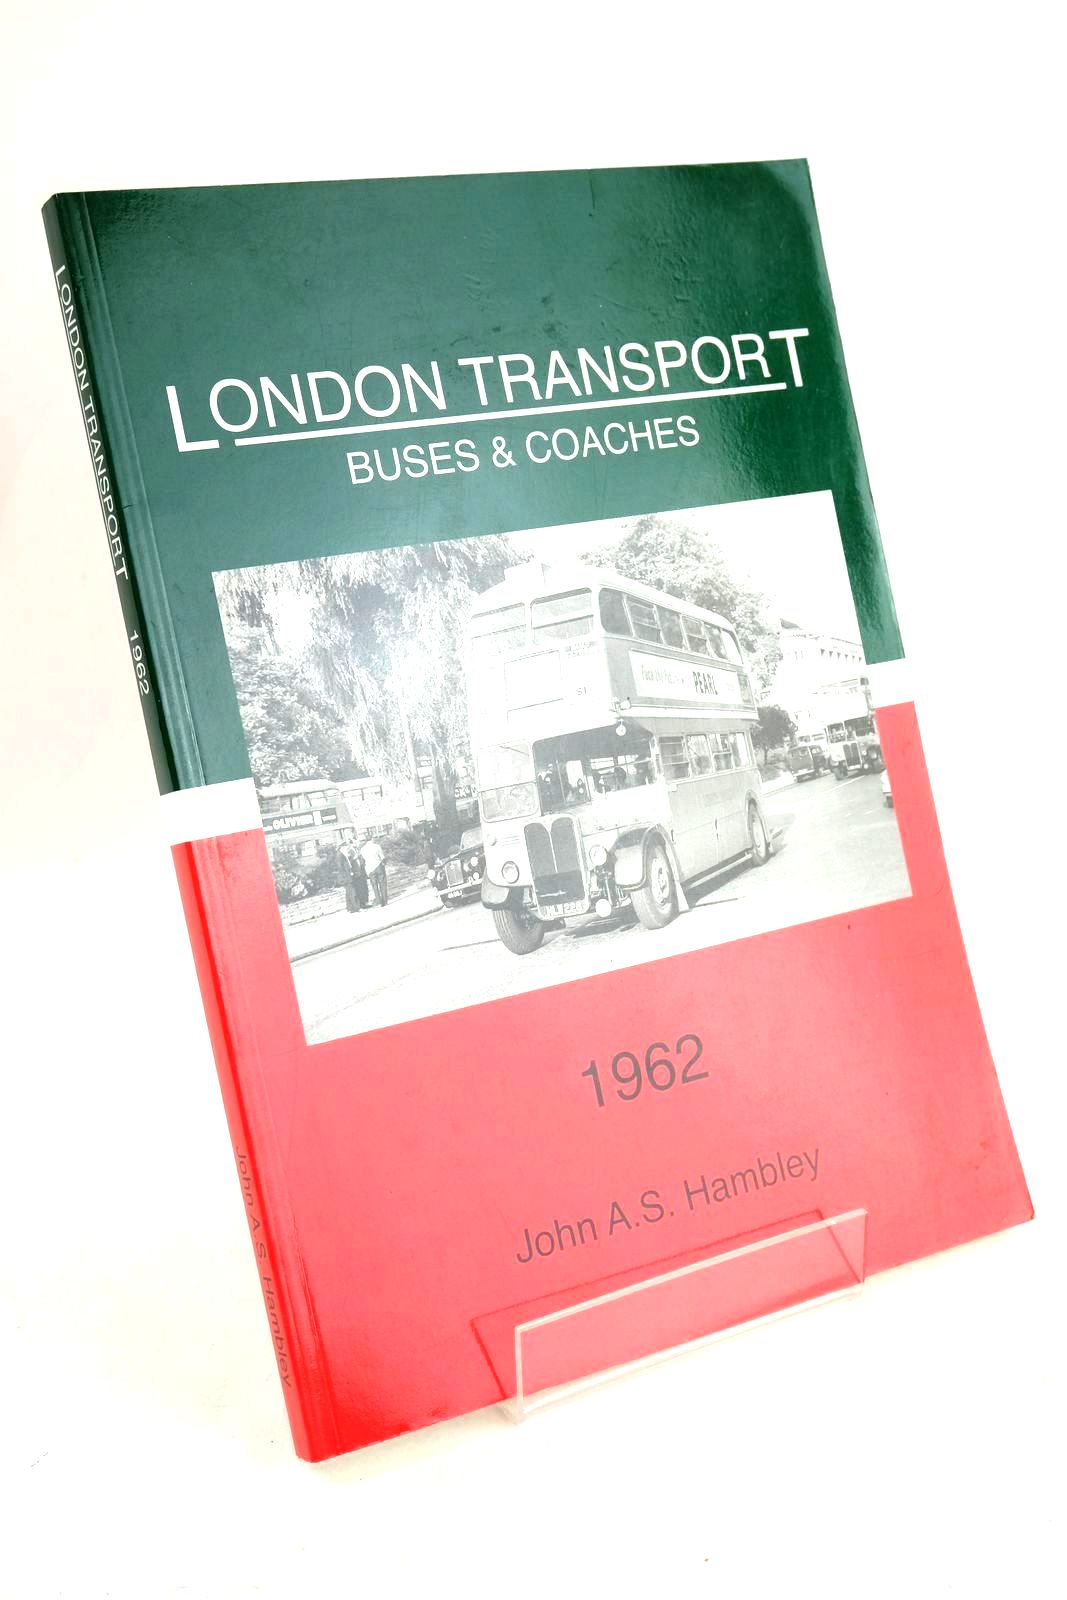 Photo of LONDON TRANSPORT BUSES & COACHES 1962 written by Hambley, John A.S. Ruddom, David published by John A.S. Hambley (STOCK CODE: 1327379)  for sale by Stella & Rose's Books